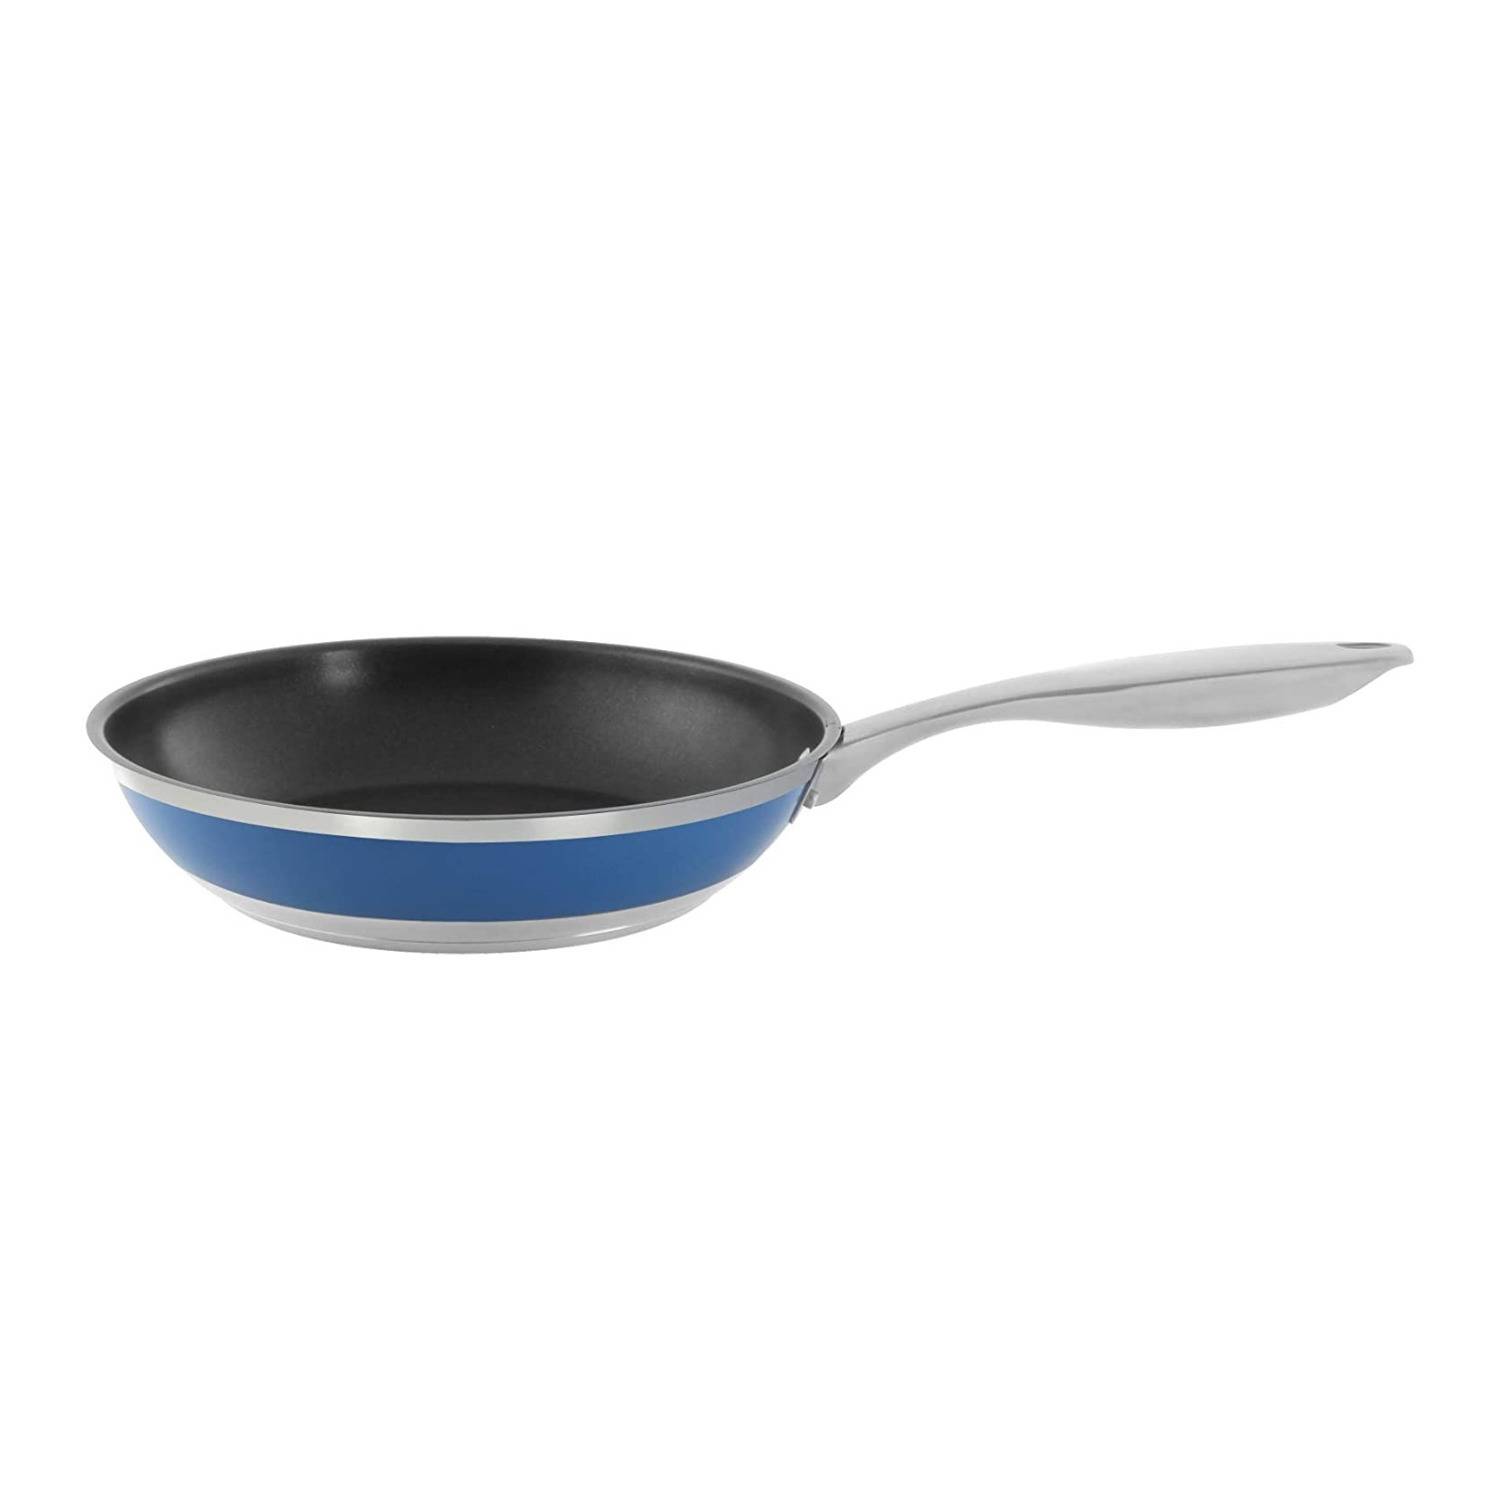 Chantal Stripes 10-Inch Nonstick Fry Pan with Blue Cove Band